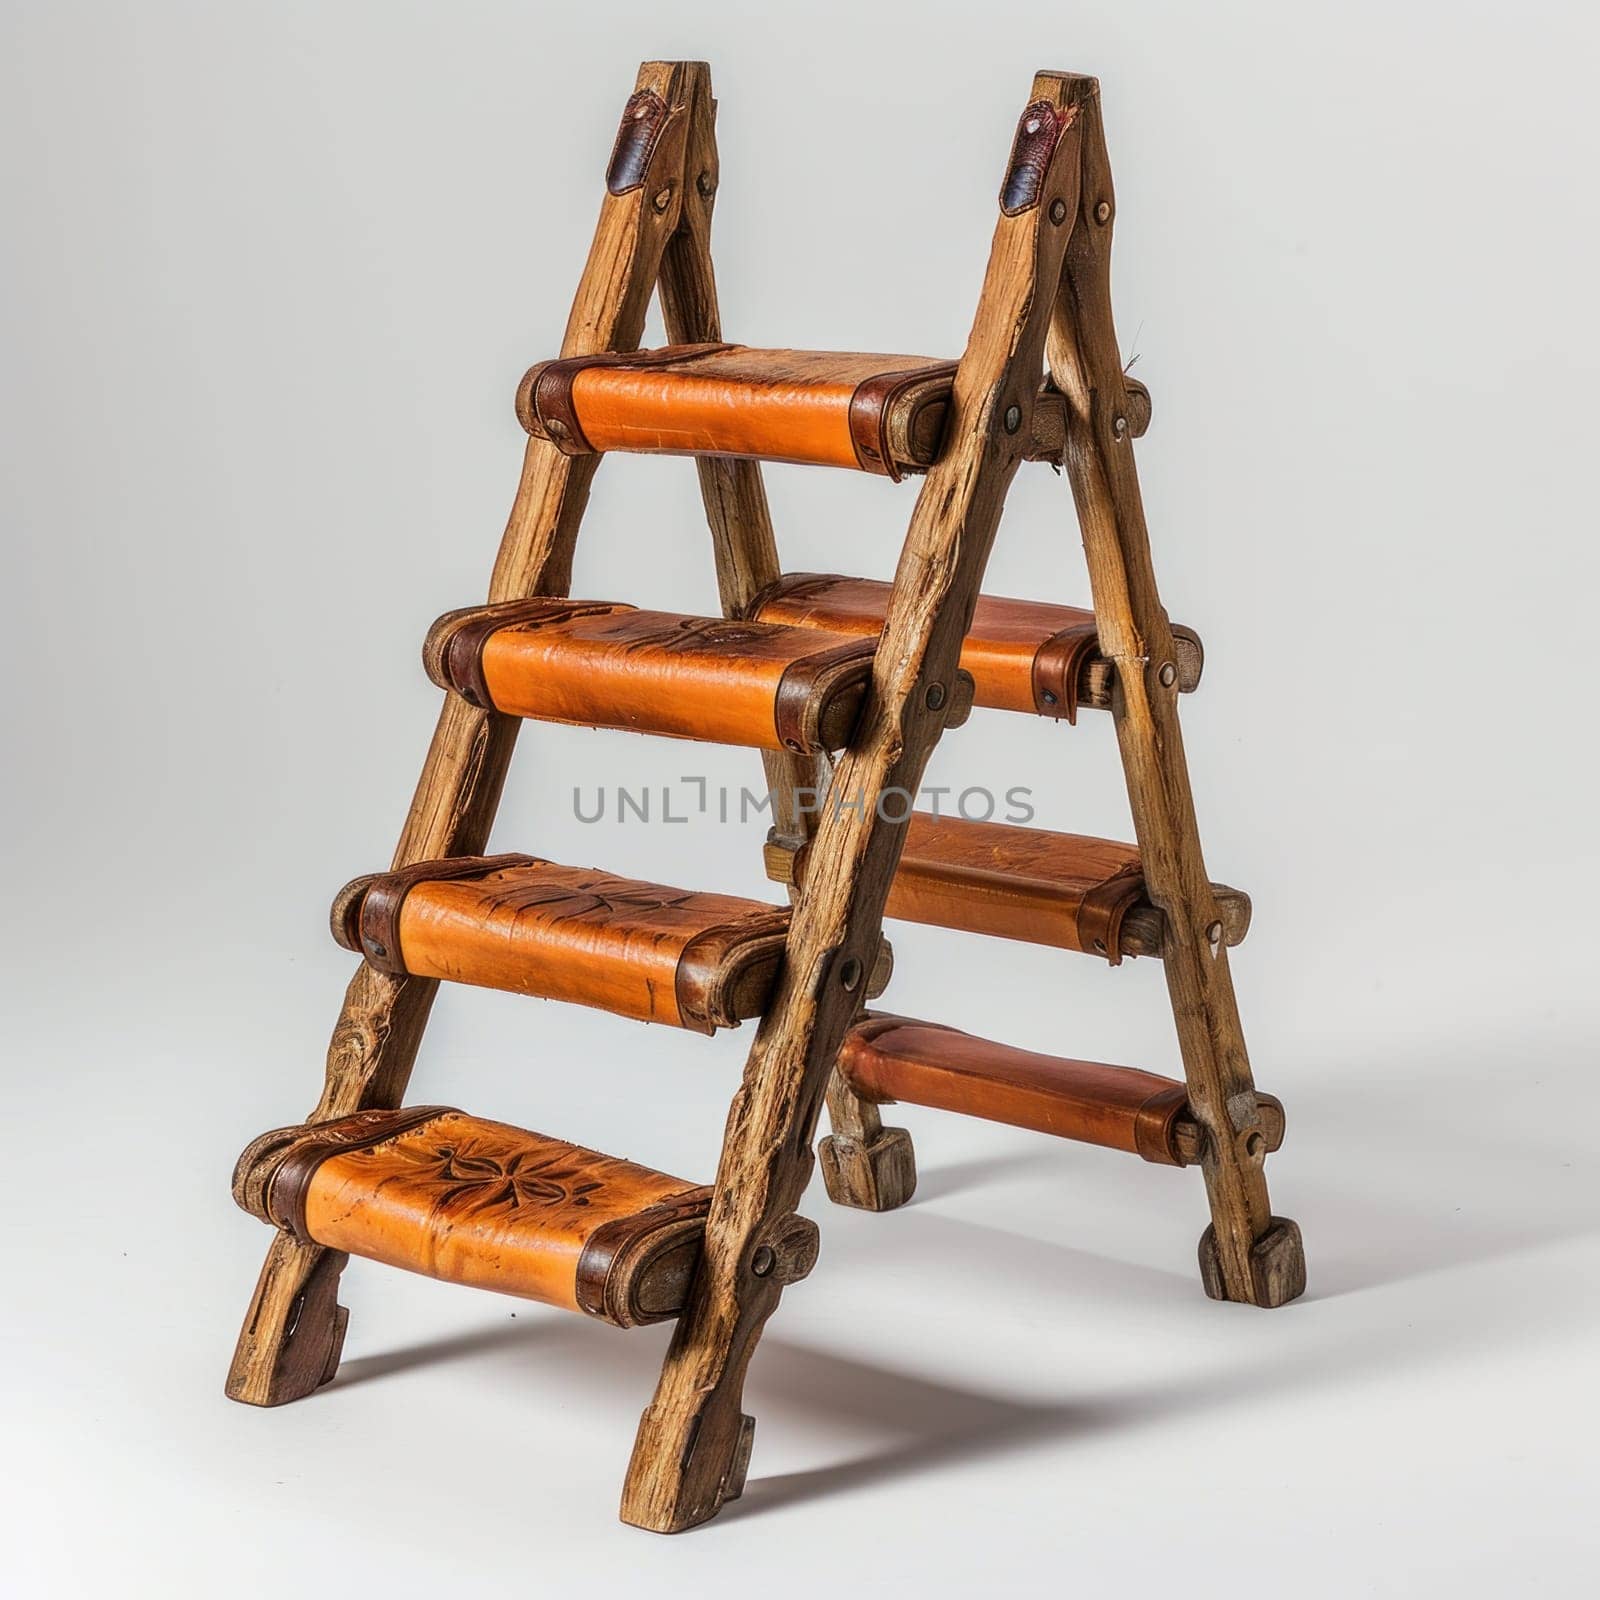 A wooden ladder with a number of leather straps on it